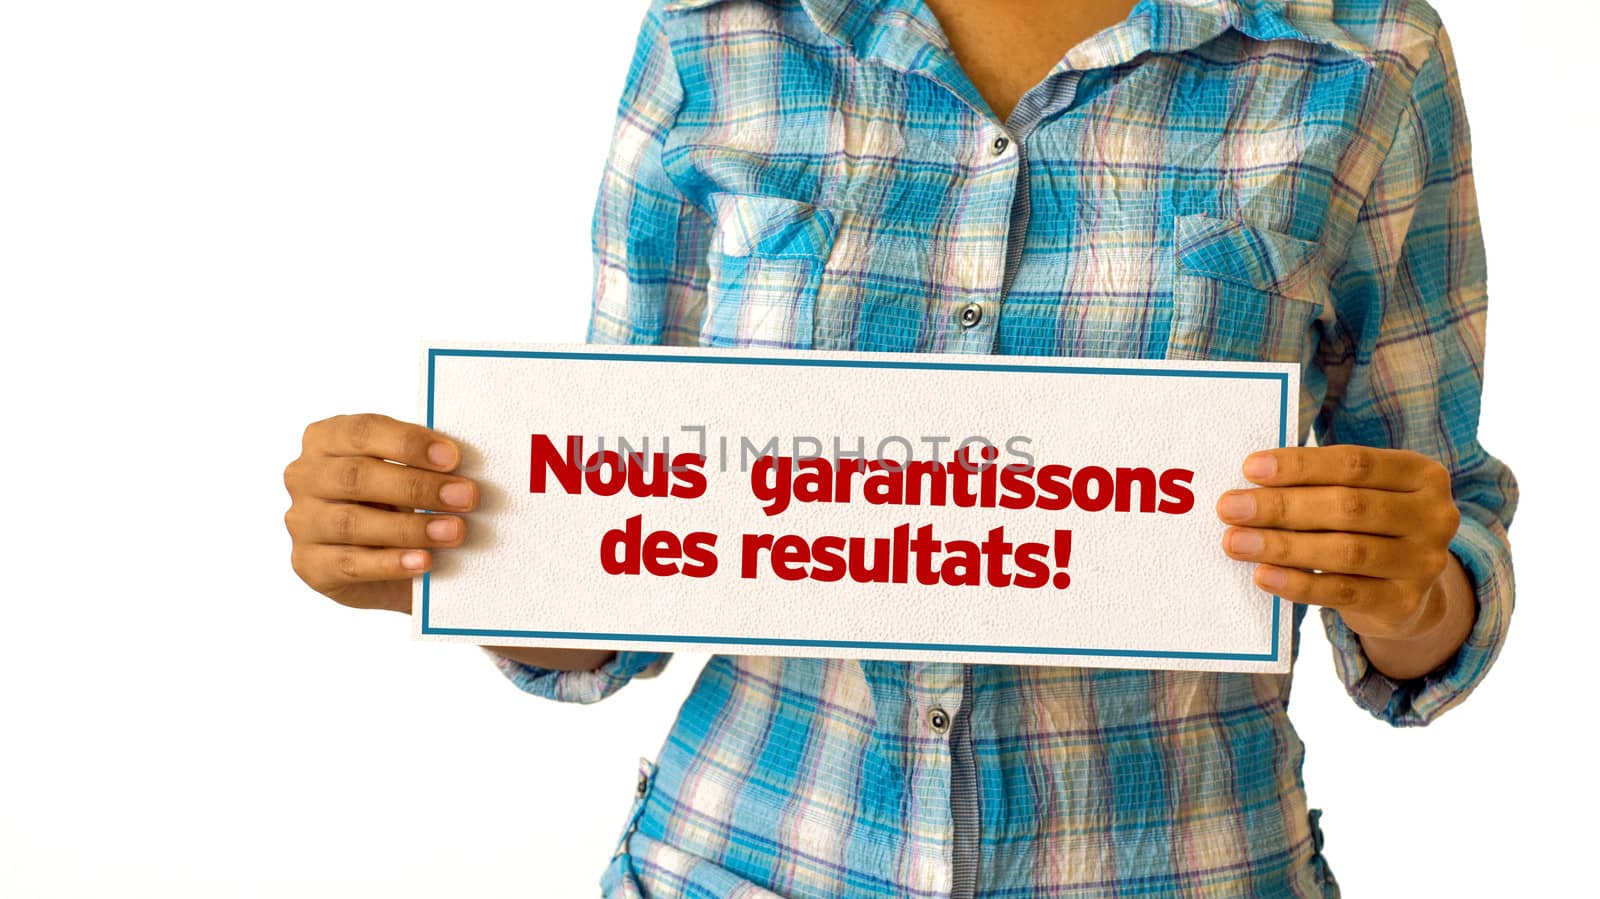 We Deliver Results (In French) by kbuntu